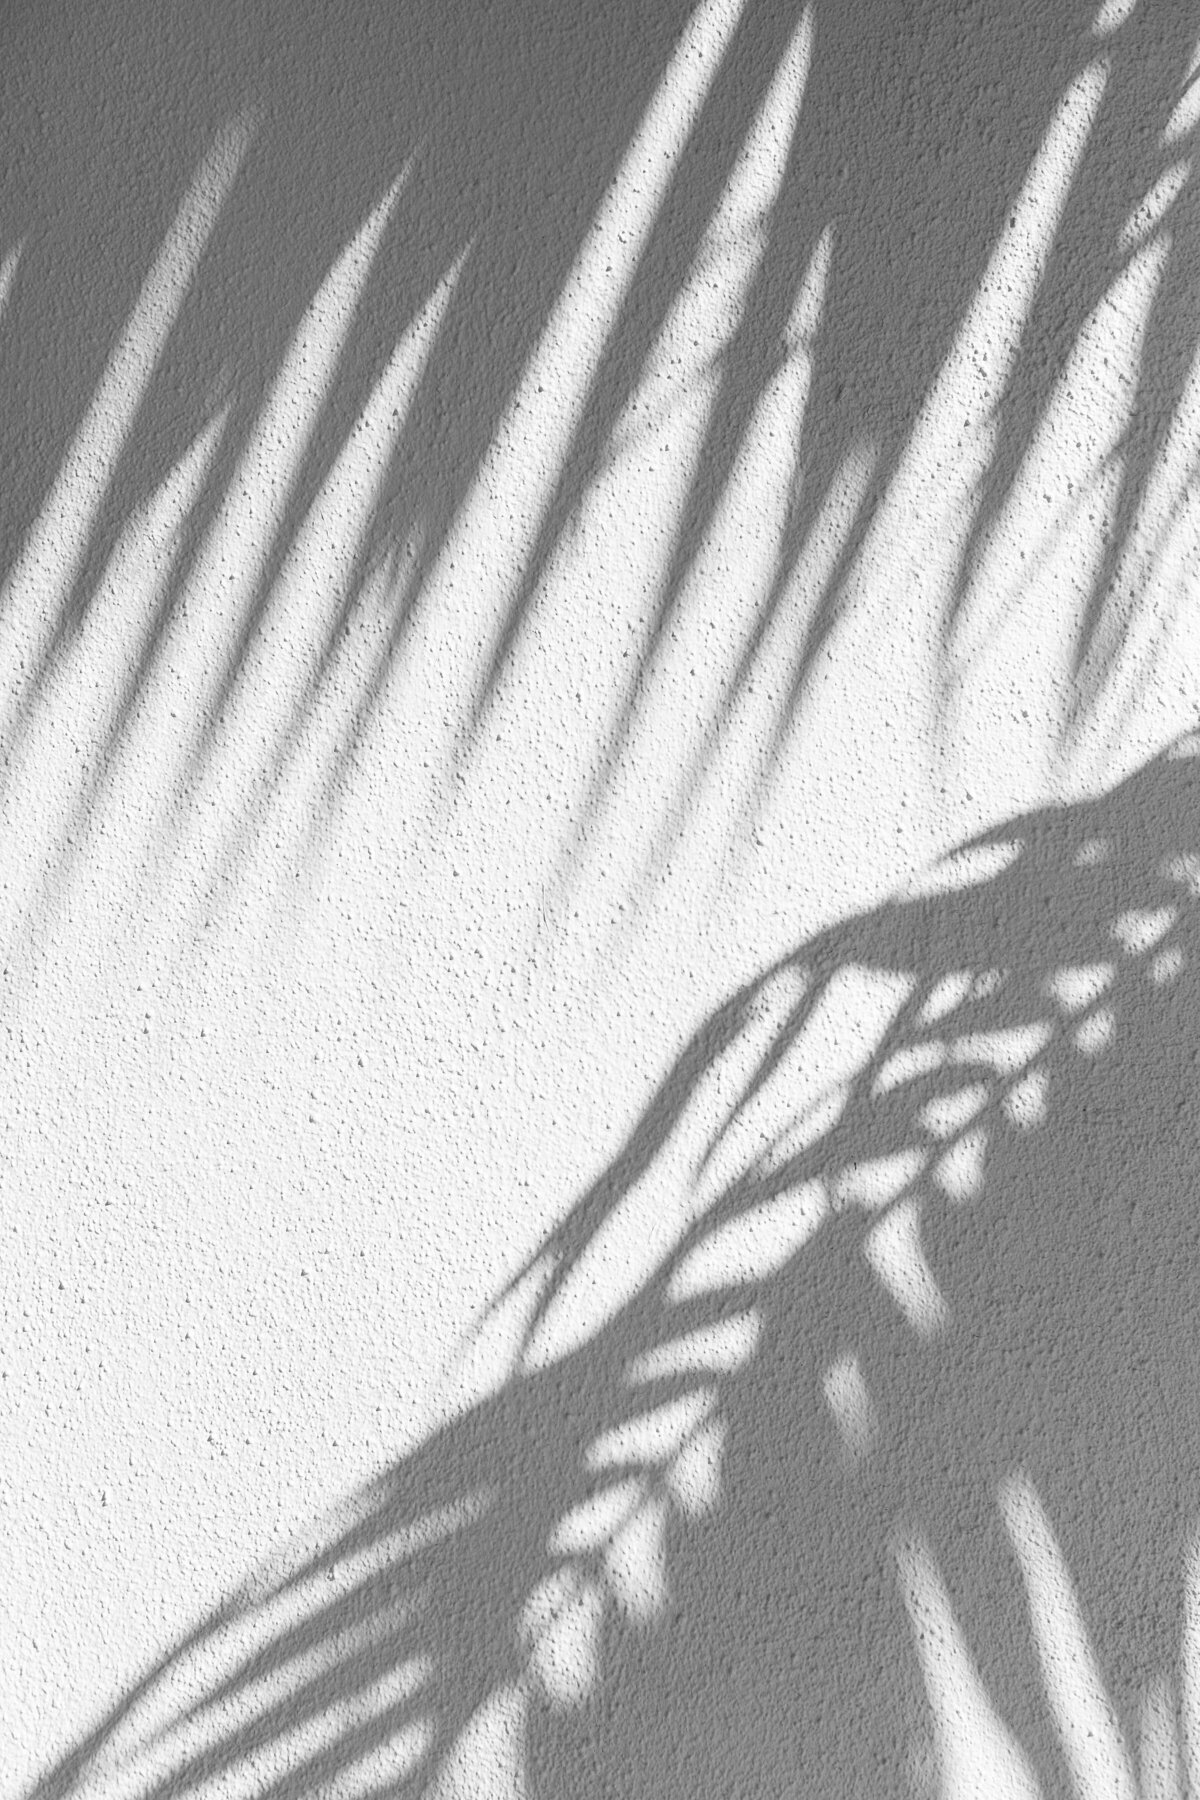 Palm frond shadow on wall at a luxury wedding venue